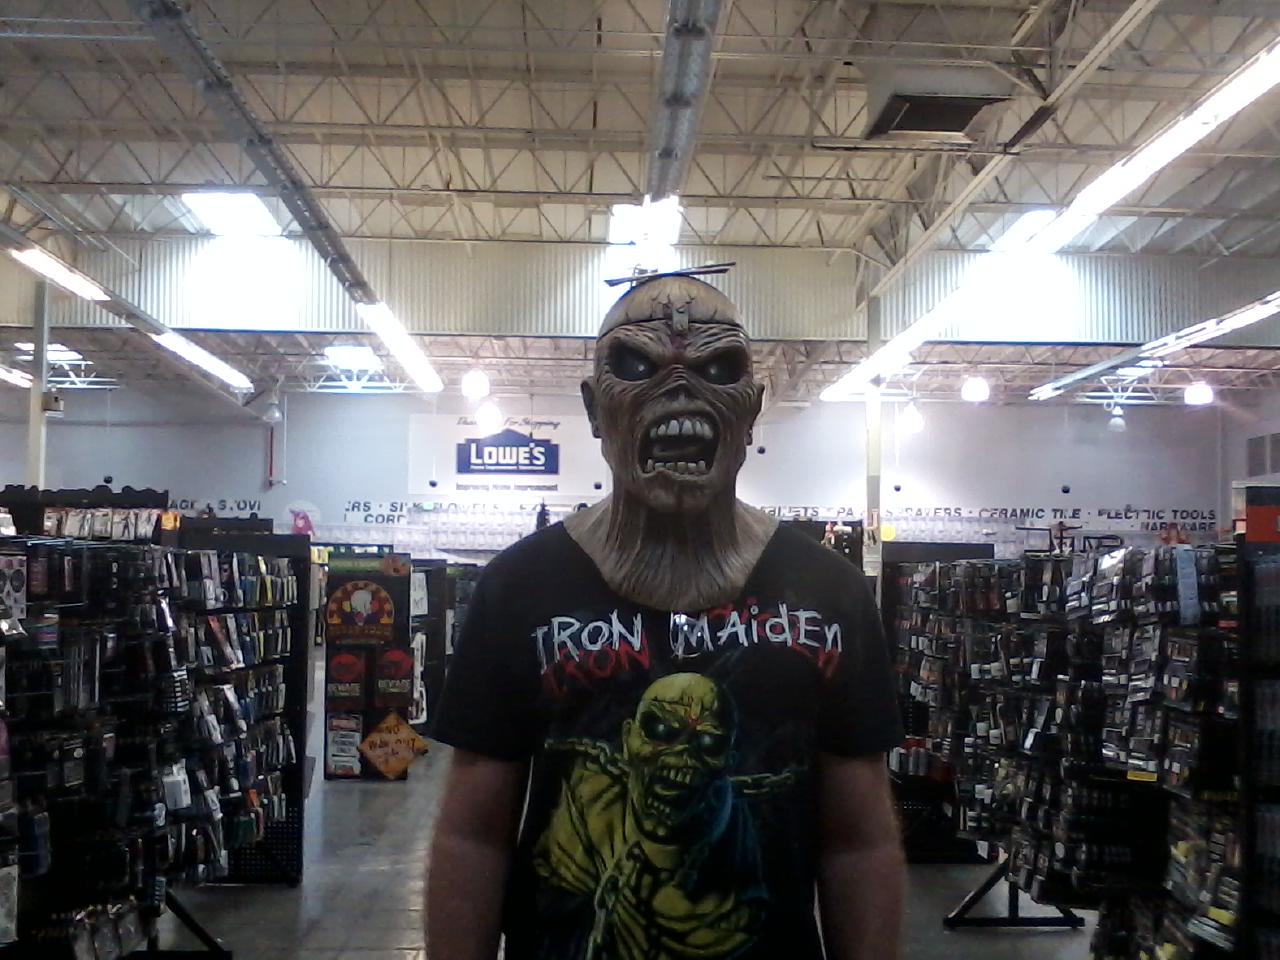 My favorite metal band iron maiden i was wearing my iron maiden piece of mind shirt and then i found the iron maiden piece of mind mask